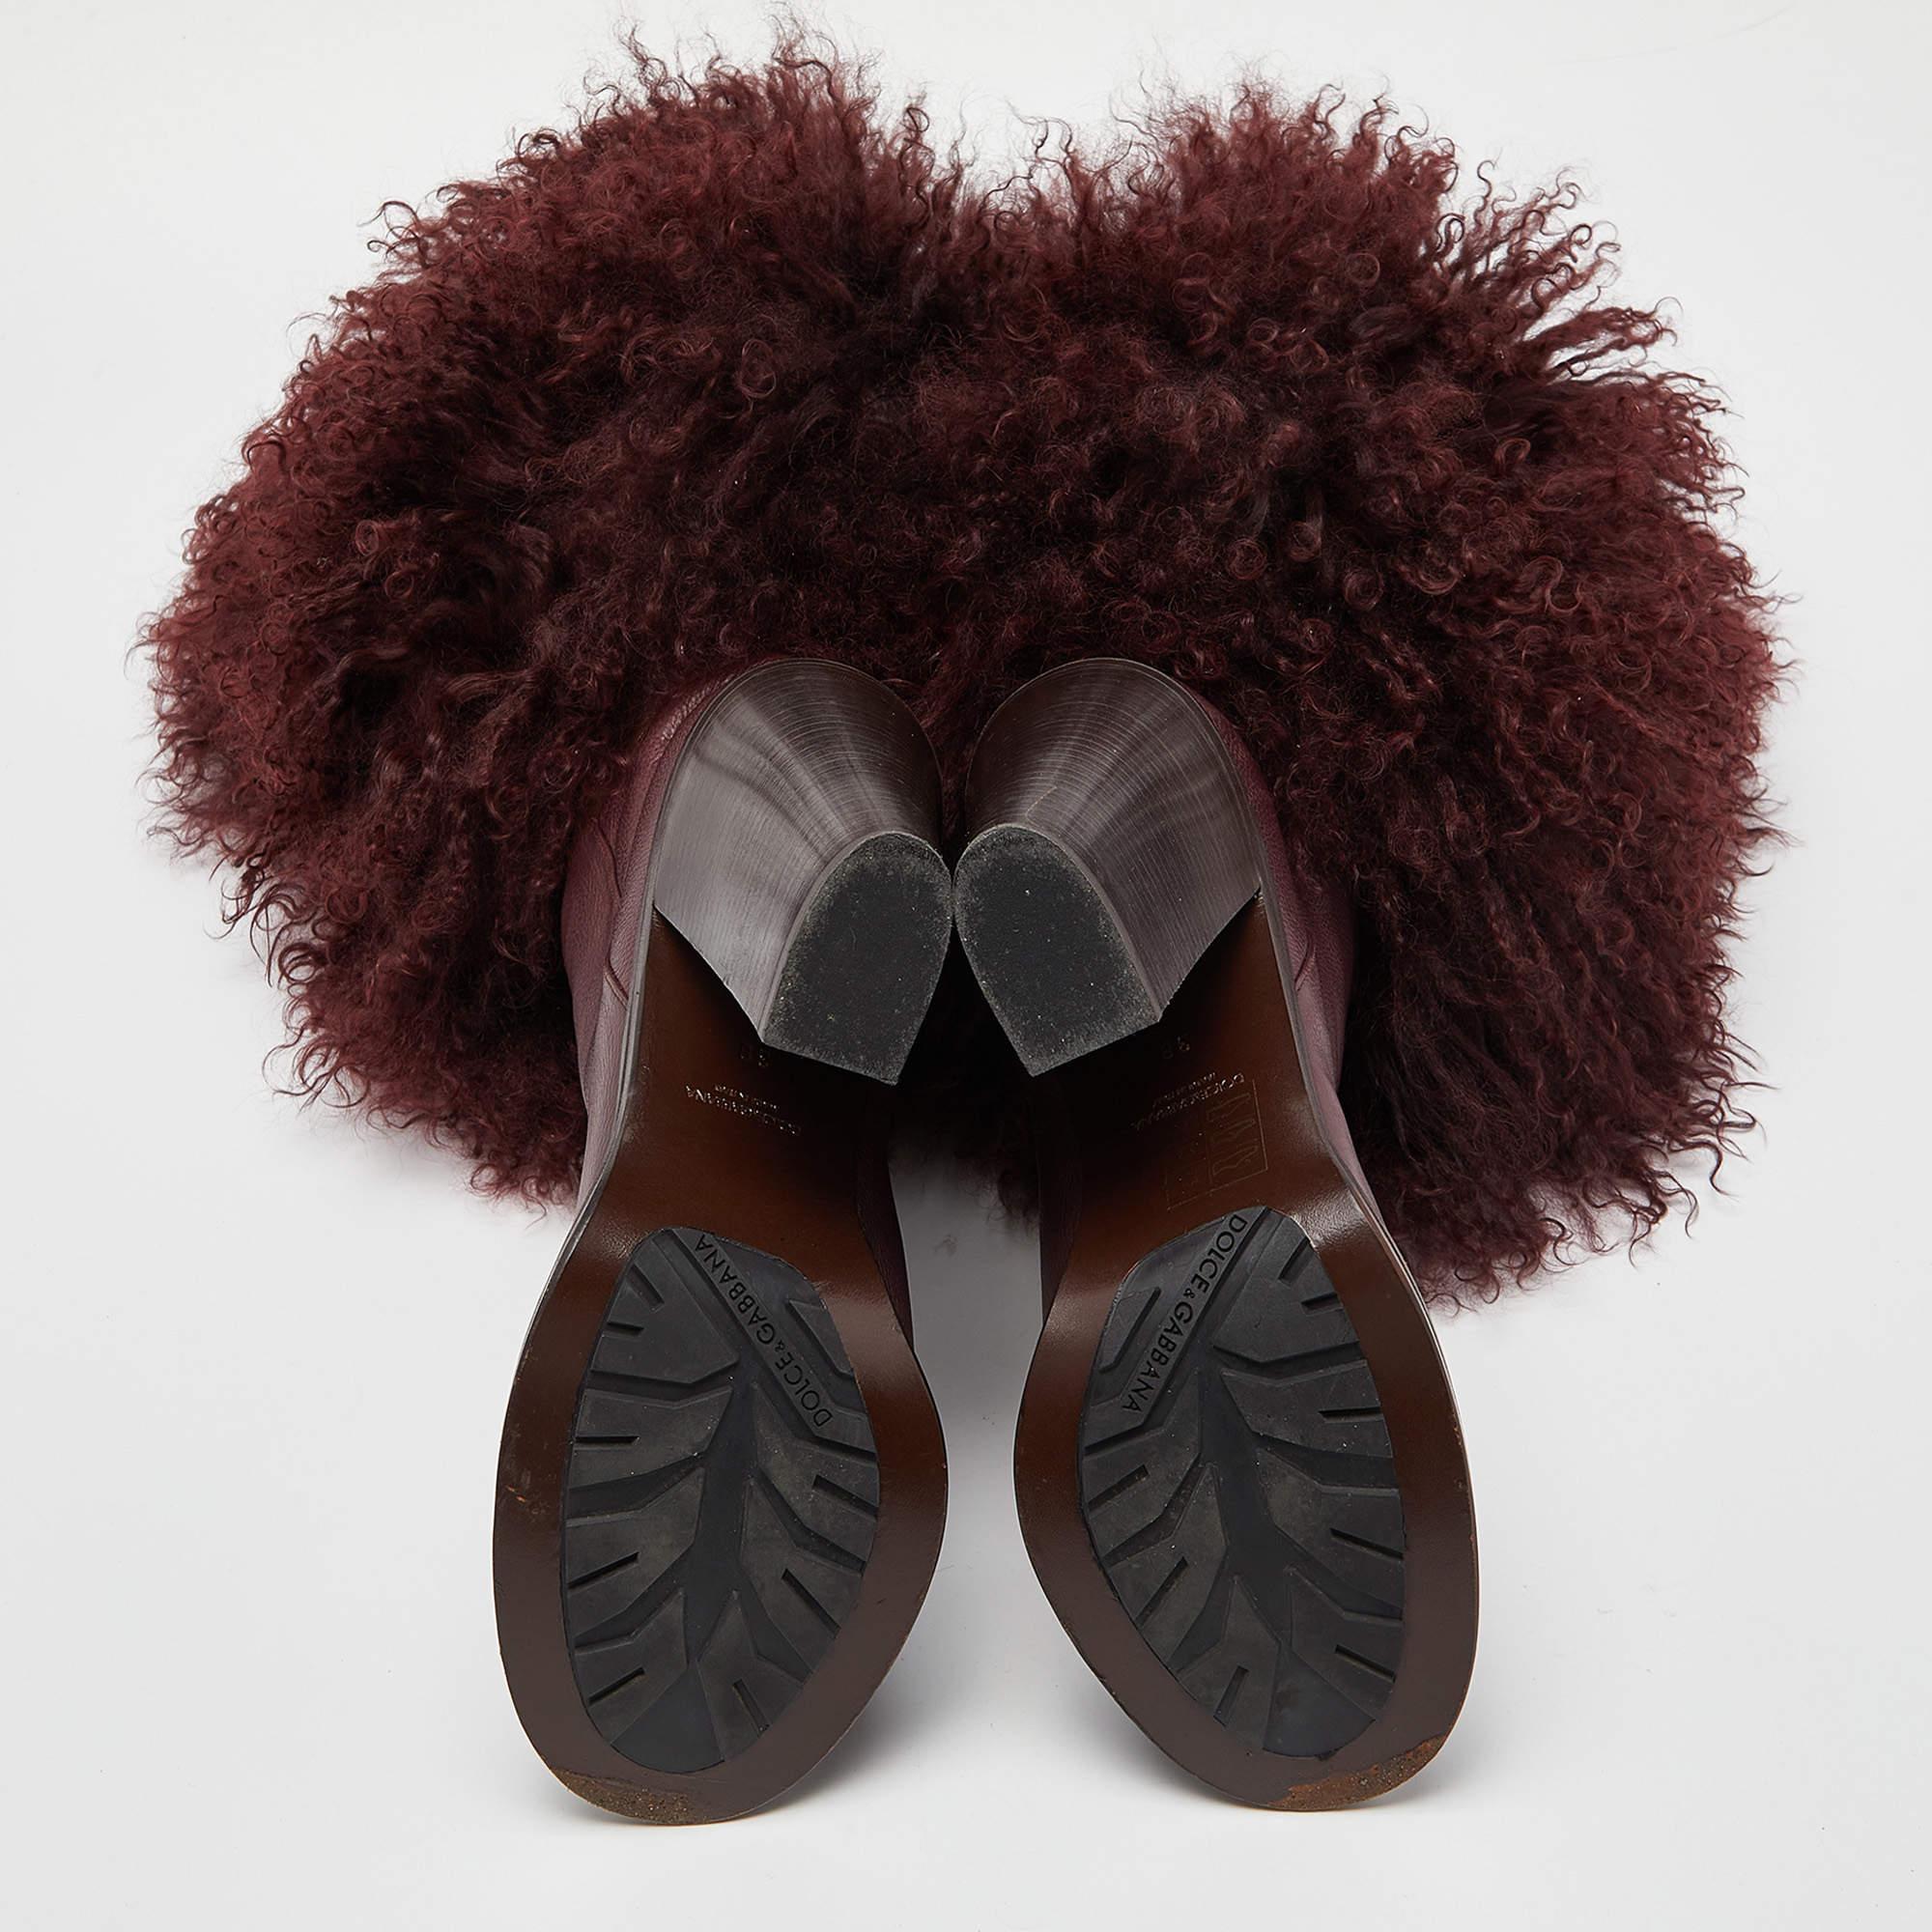 Dolce & Gabbana Burgundy Fur and Leather Calf Length Boots  For Sale 2